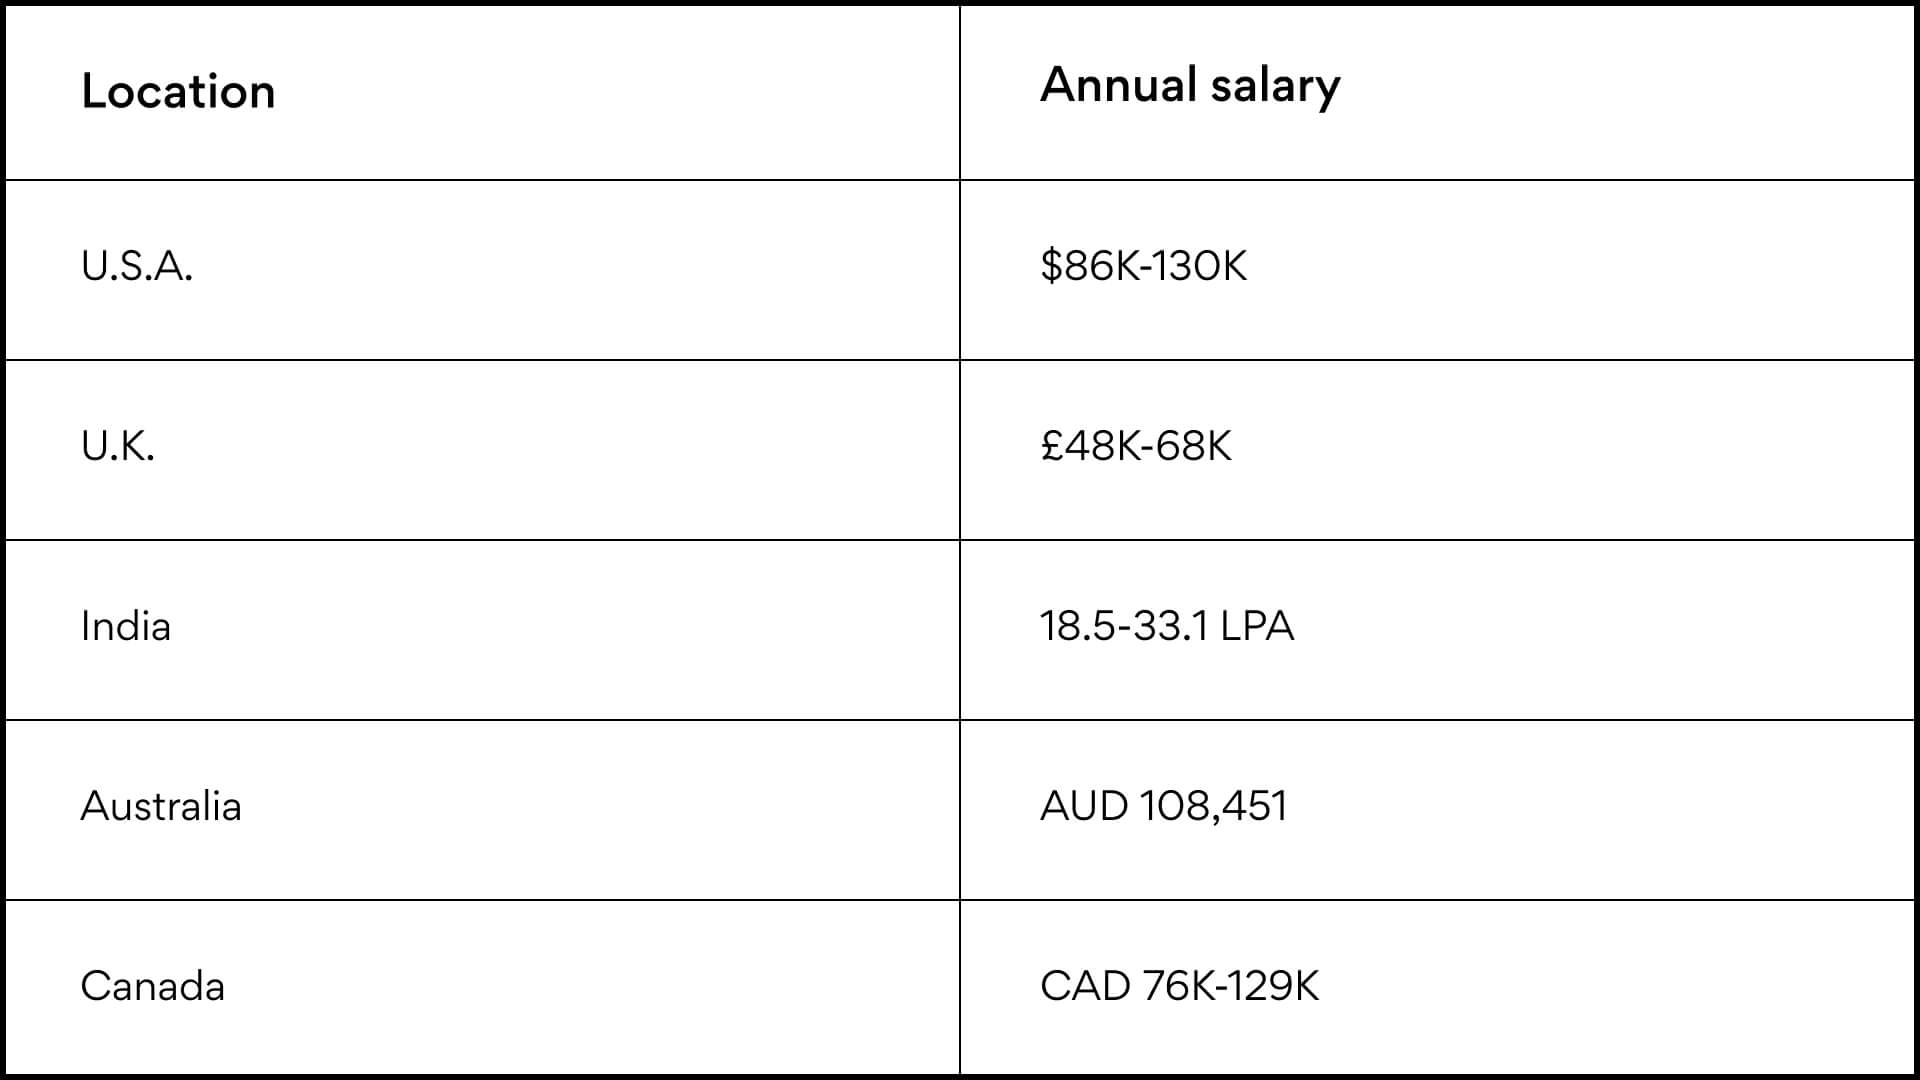 table on product owner's salaries according to locations